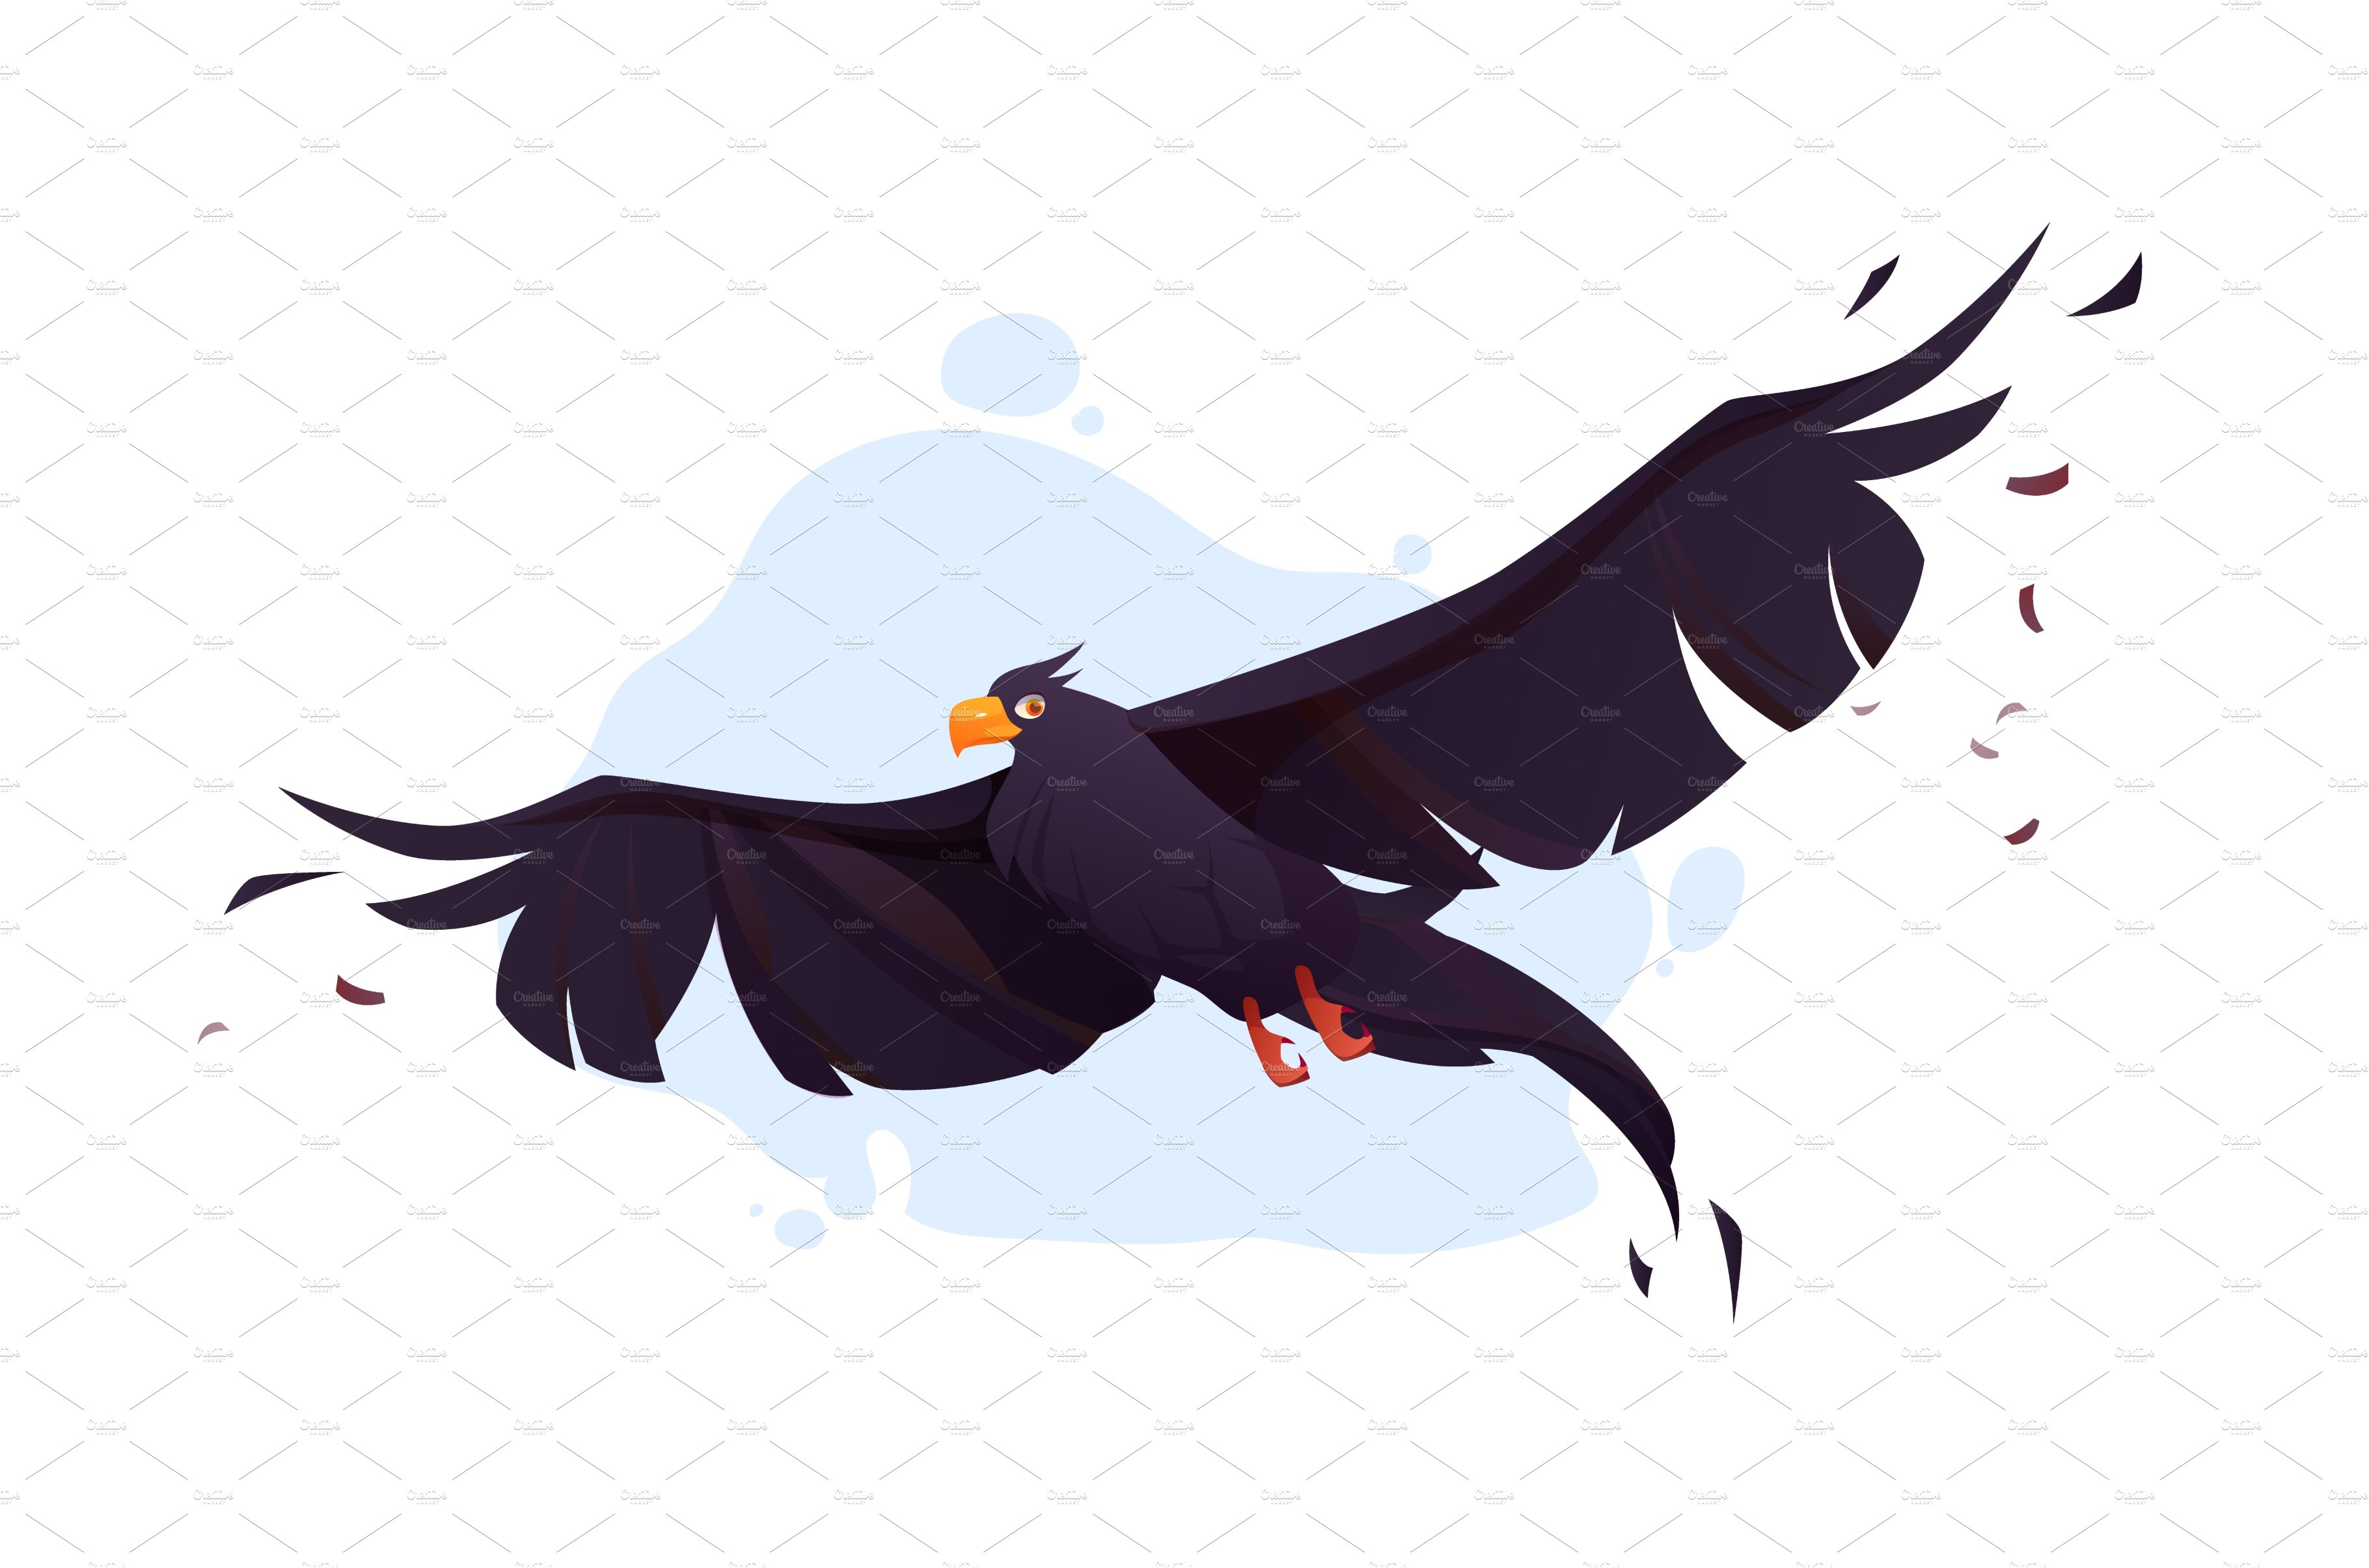 Crow with black wings fly in blue cover image.